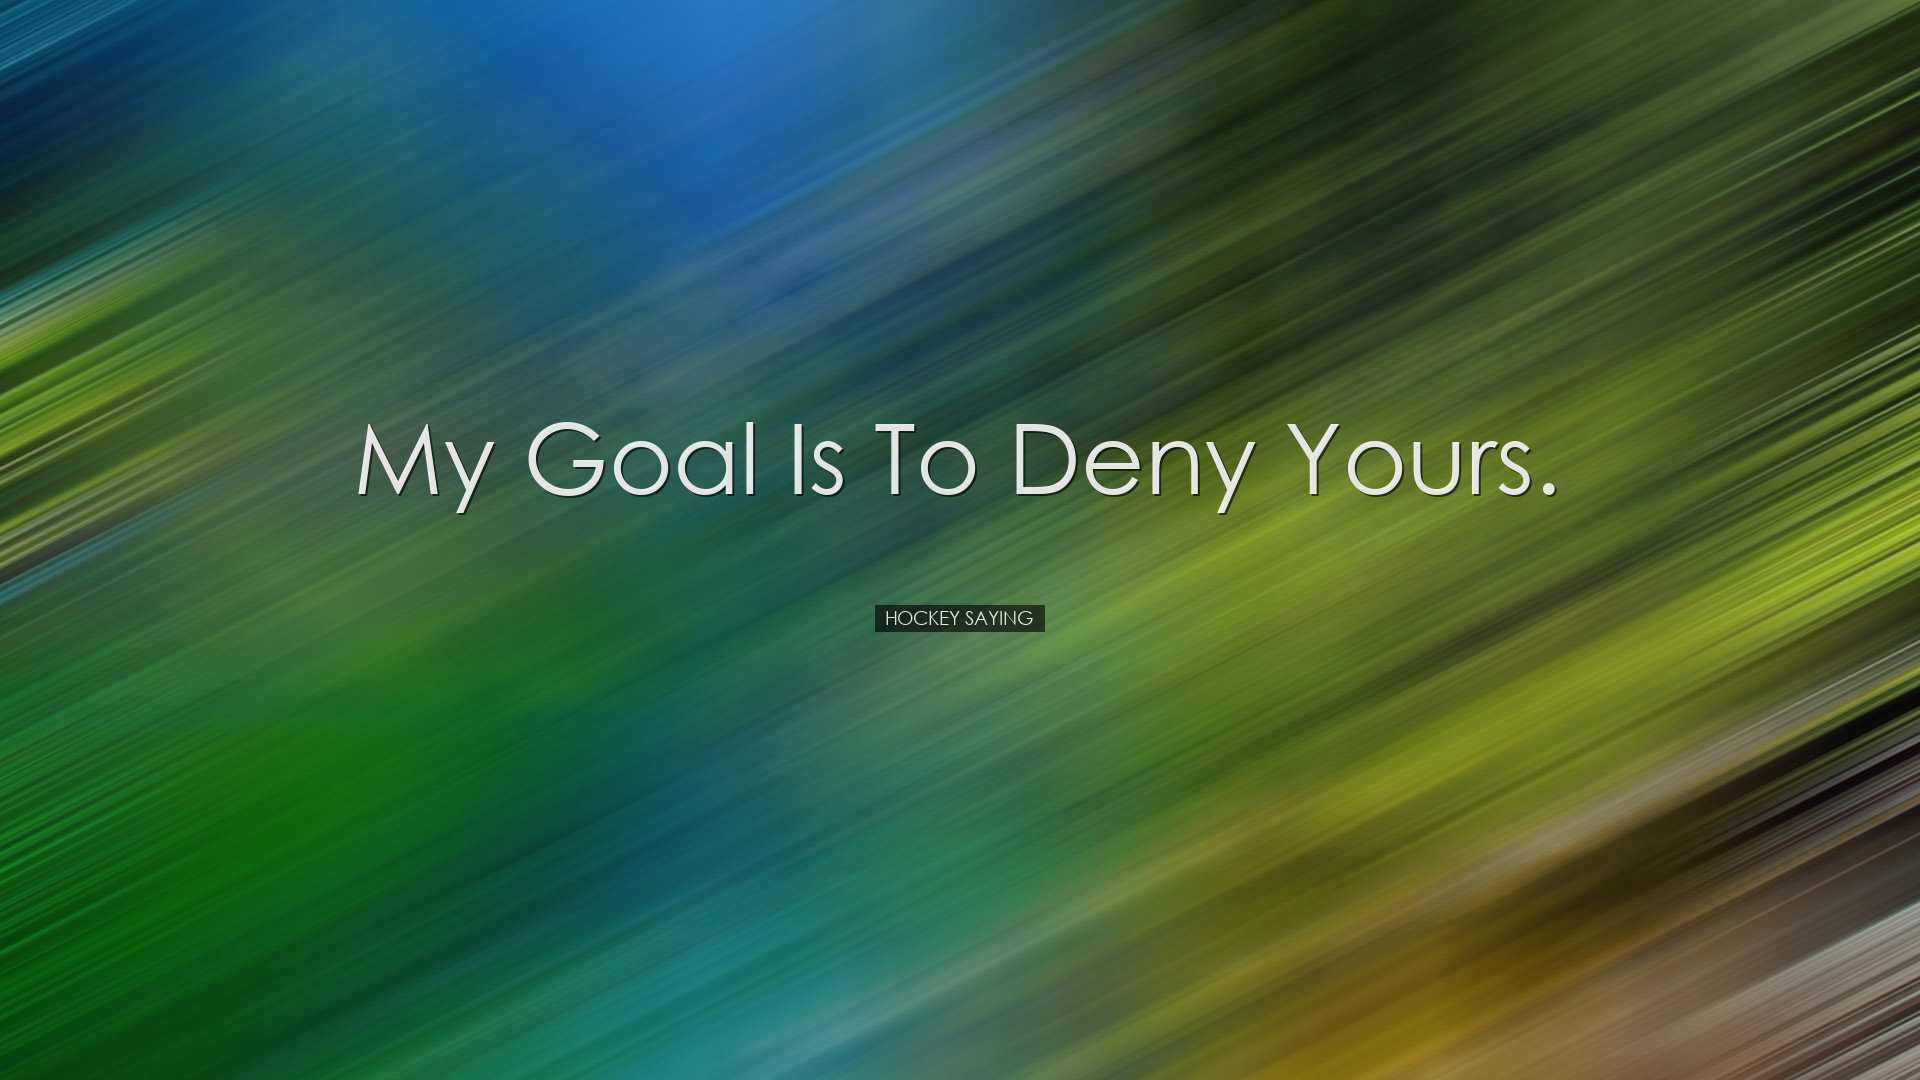 My goal is to deny yours. - Hockey Saying